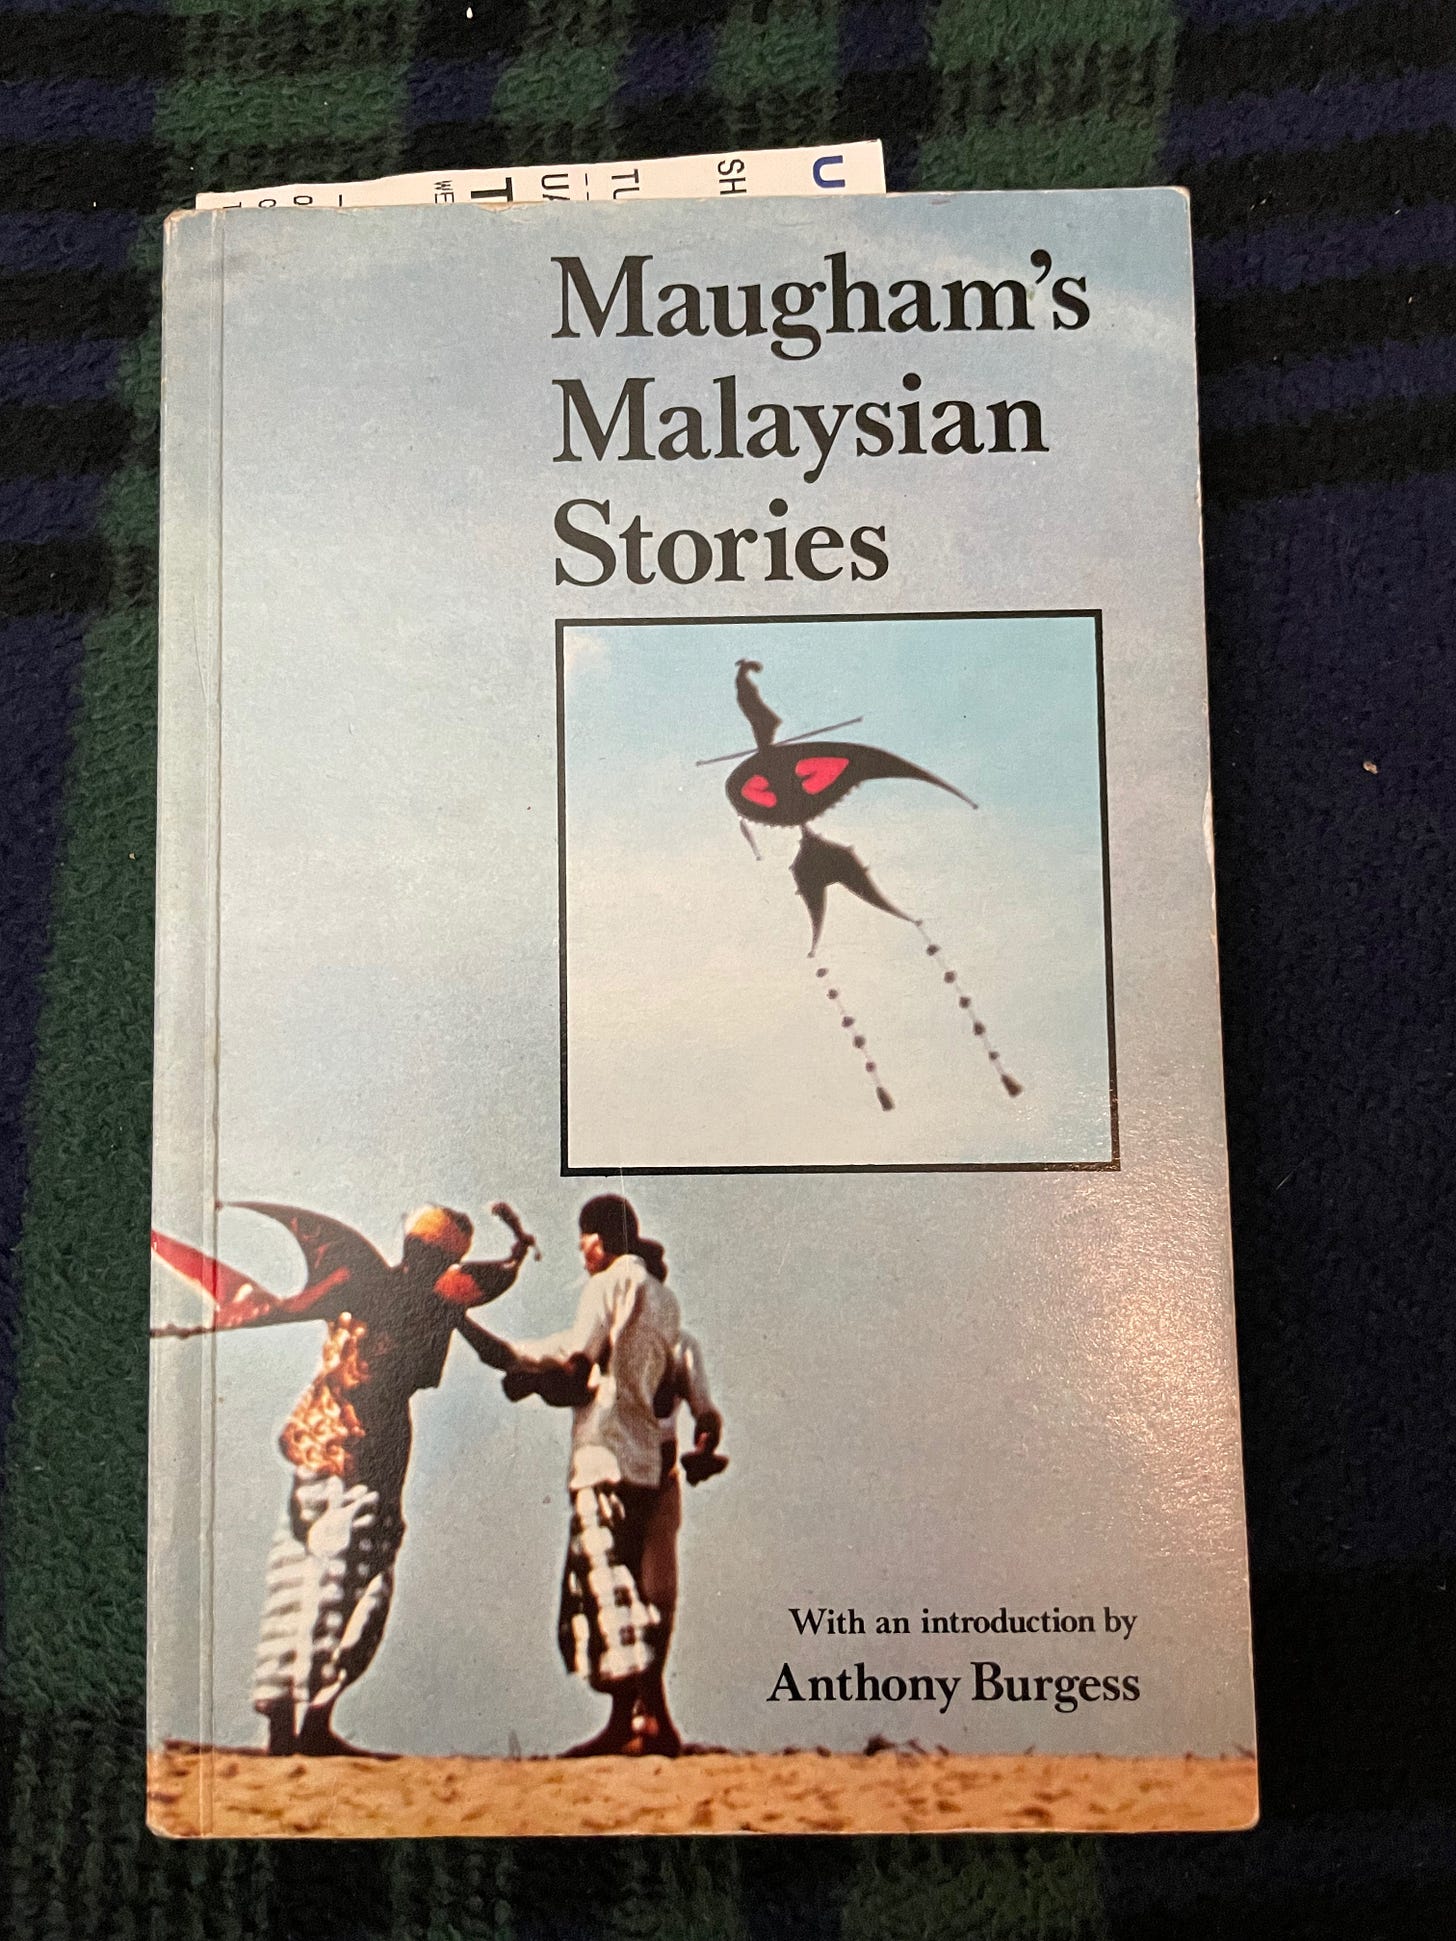 Photo of the cover of the book Maugham’s Malaysian Stories, by Somerset Maugham, with an introduction by Anthony Burgess